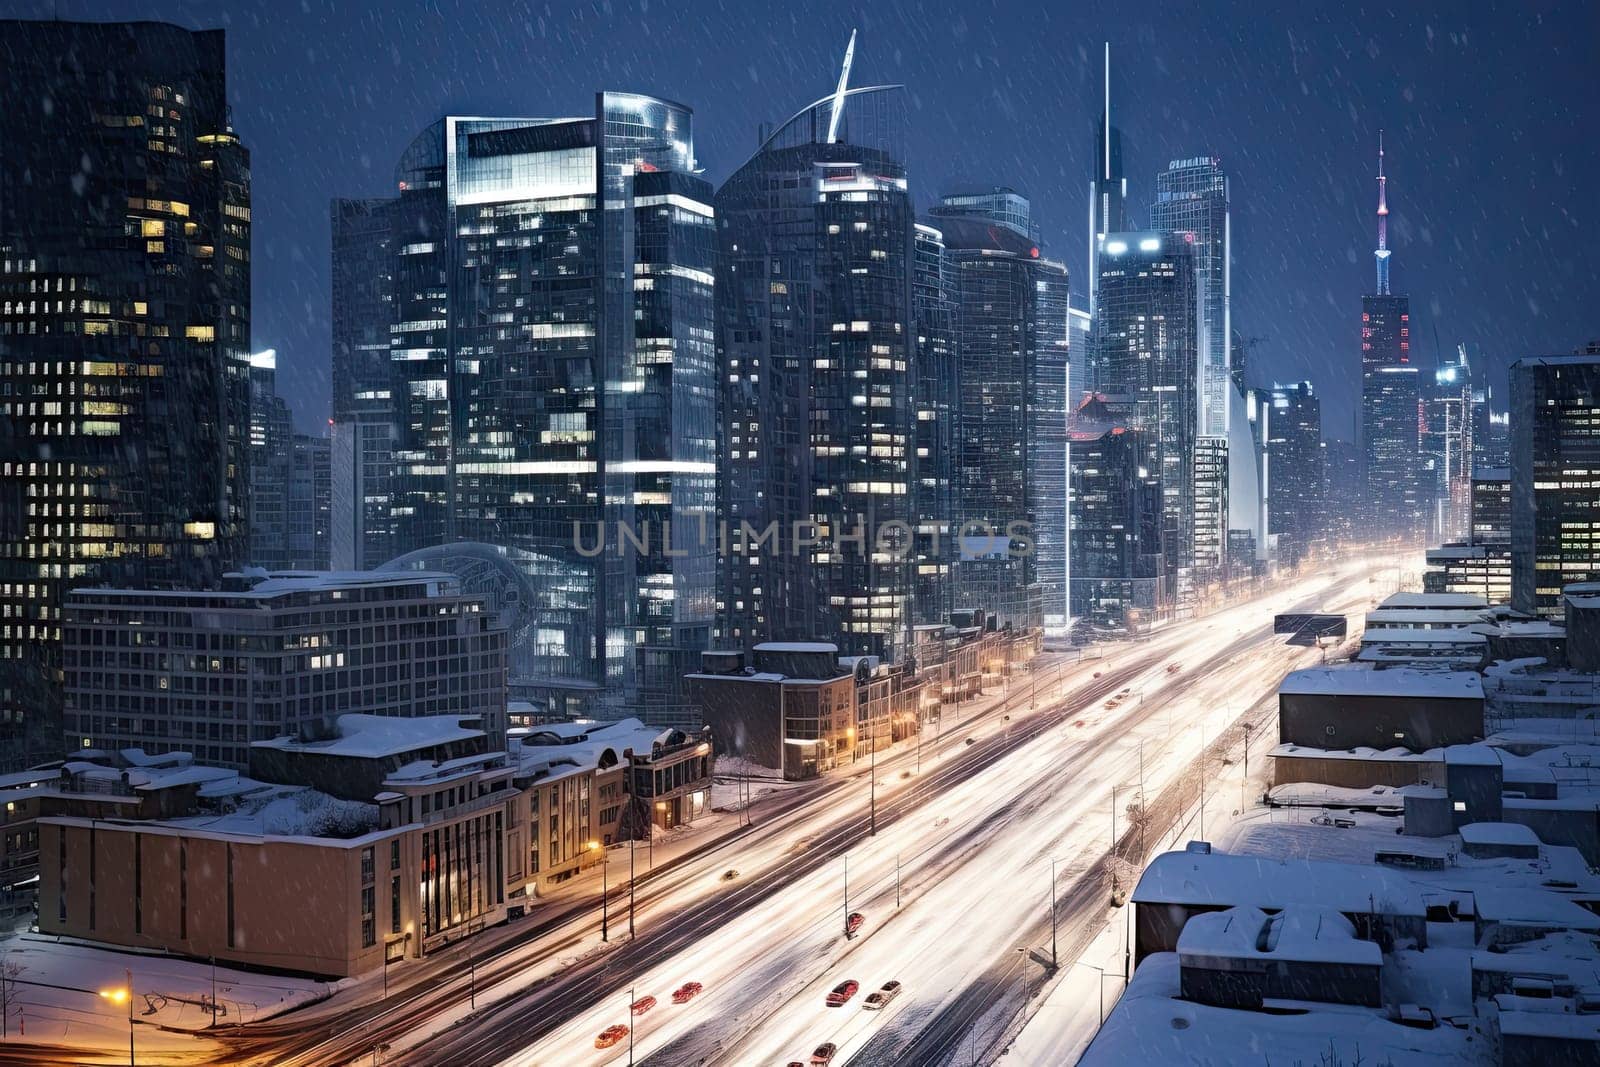 A Serene Winter Night: Snow-Covered City Skyline Reflecting in Glistening Streets